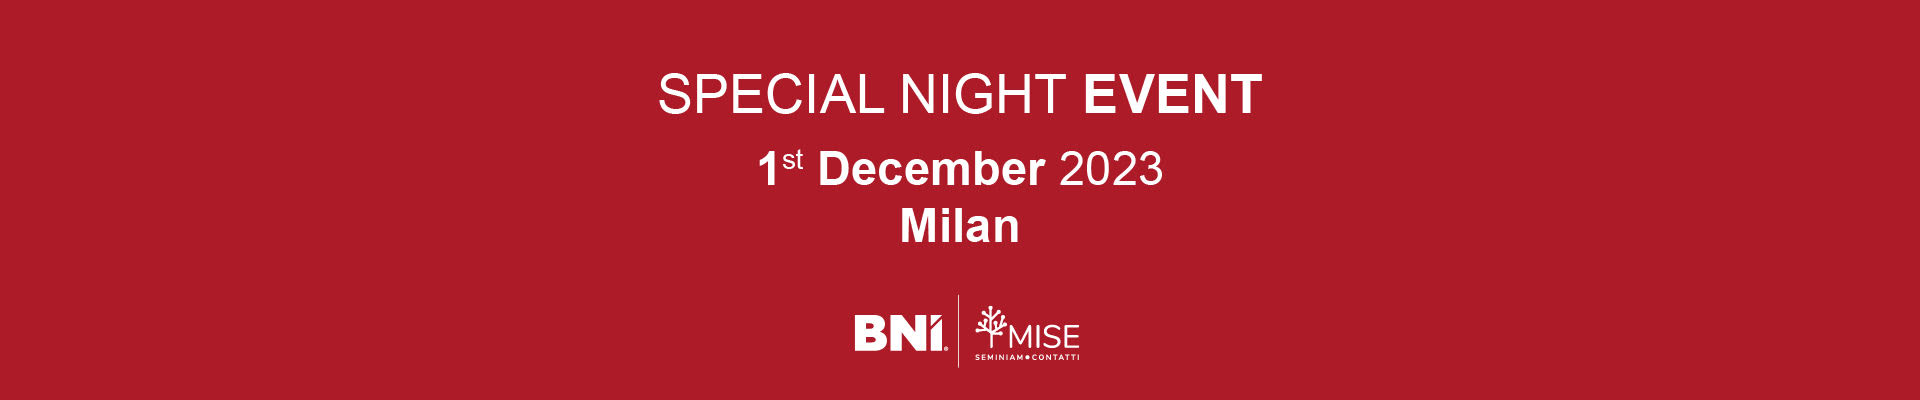 Special Night Event – Milan save the date